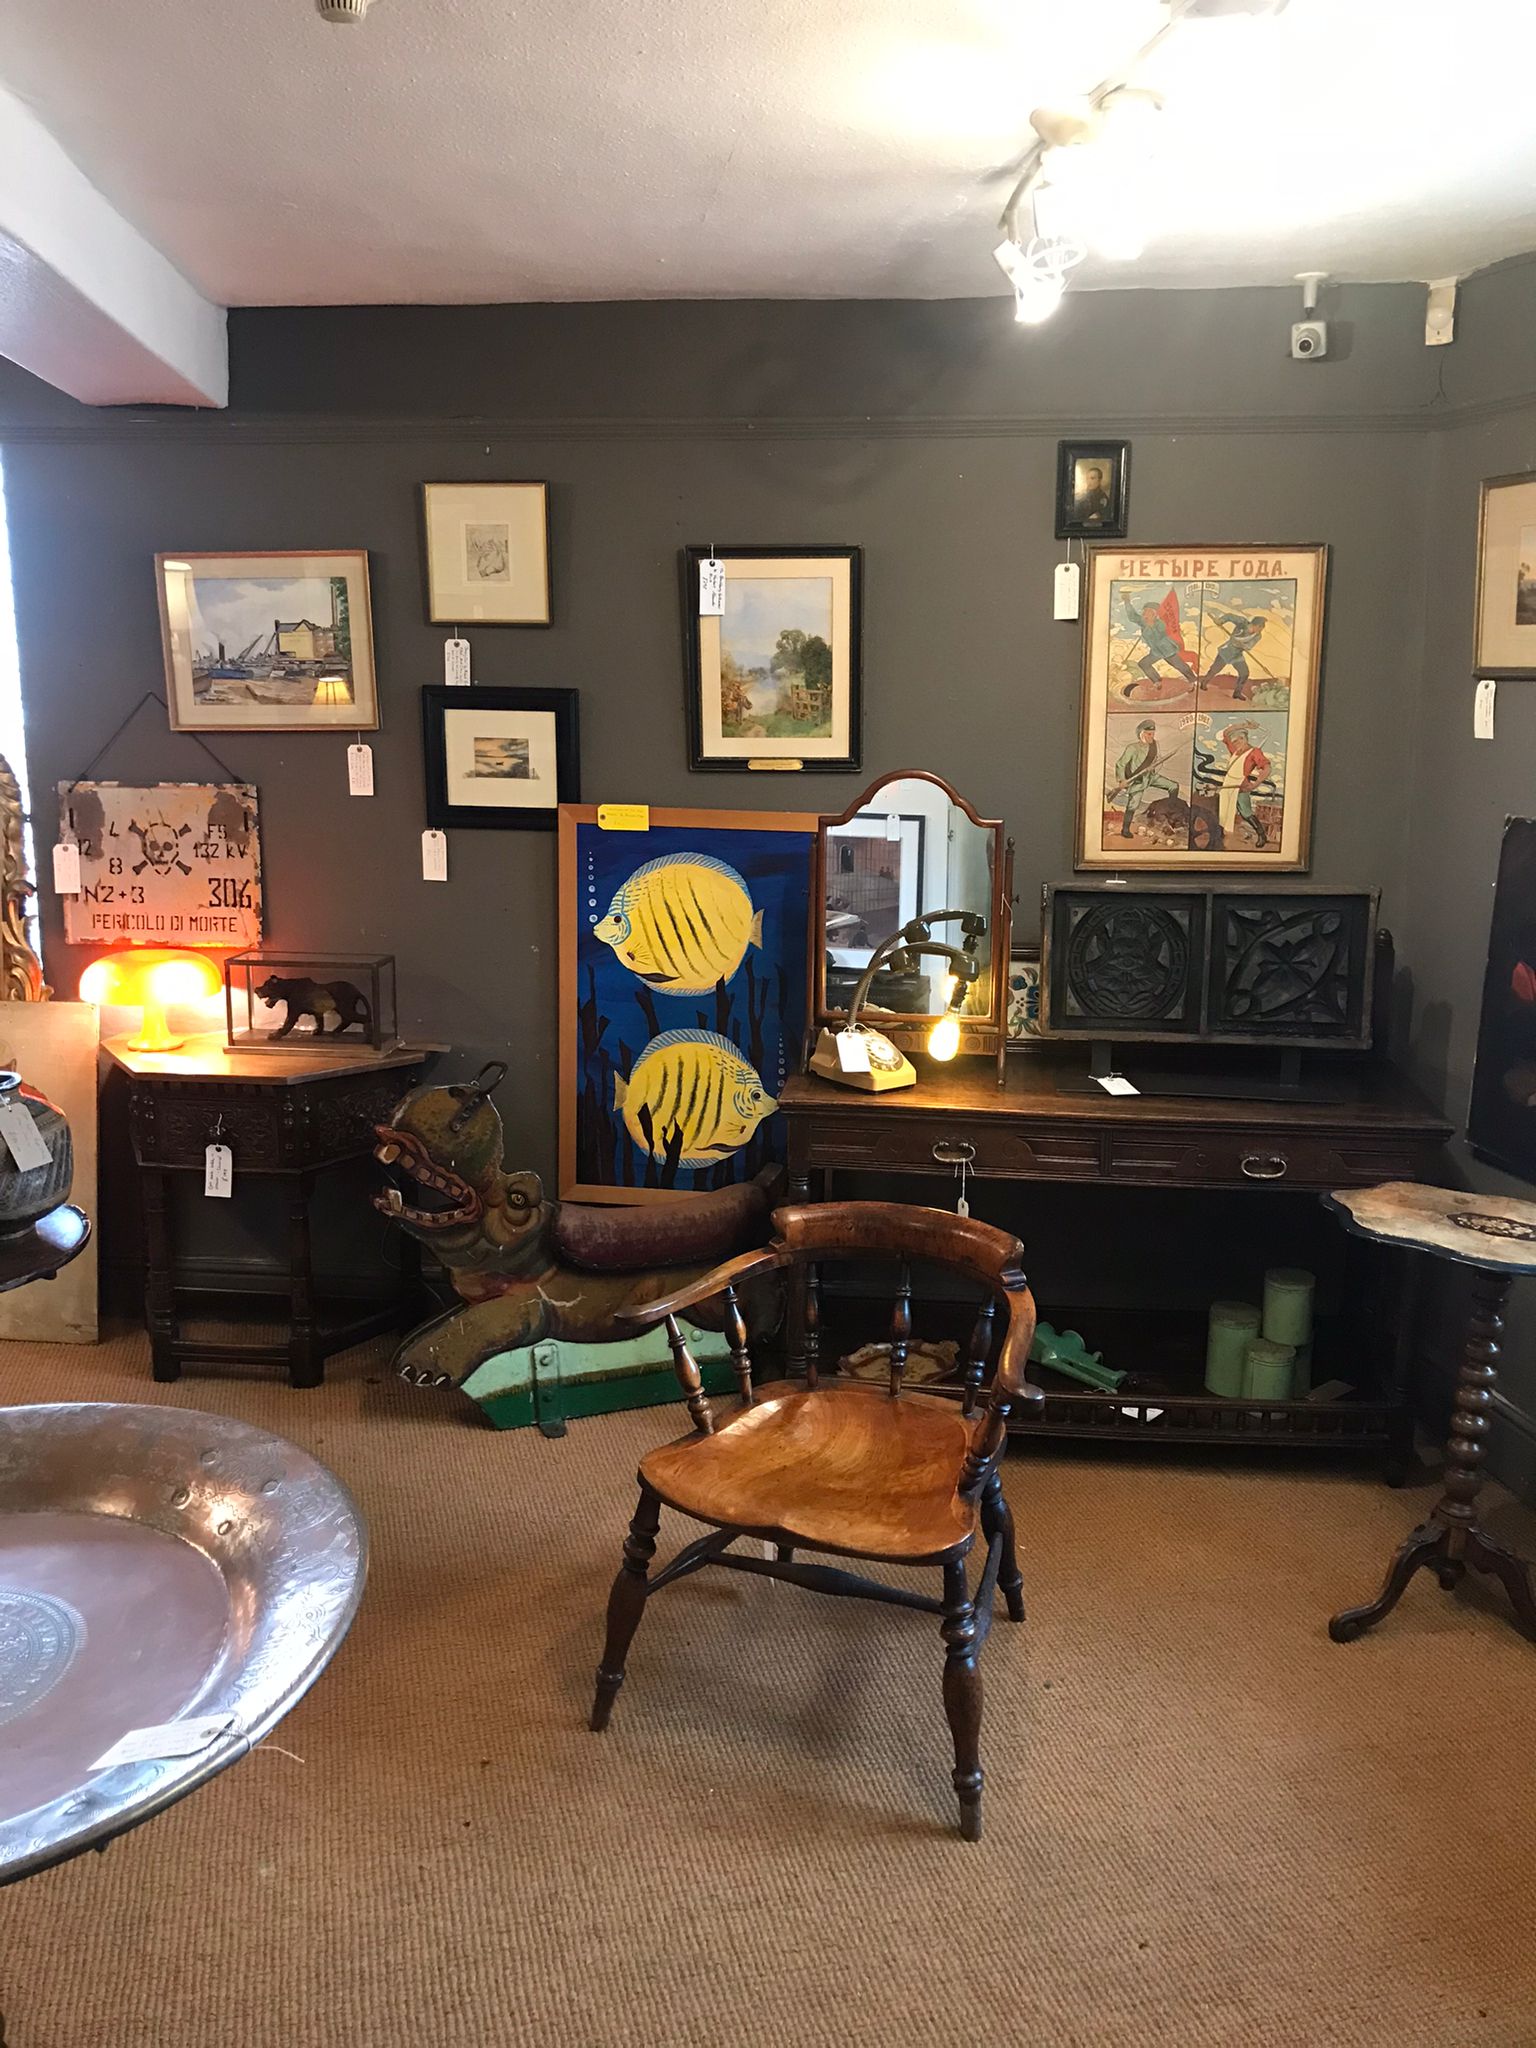 Hawkwood Antiques has done so well he has expanded